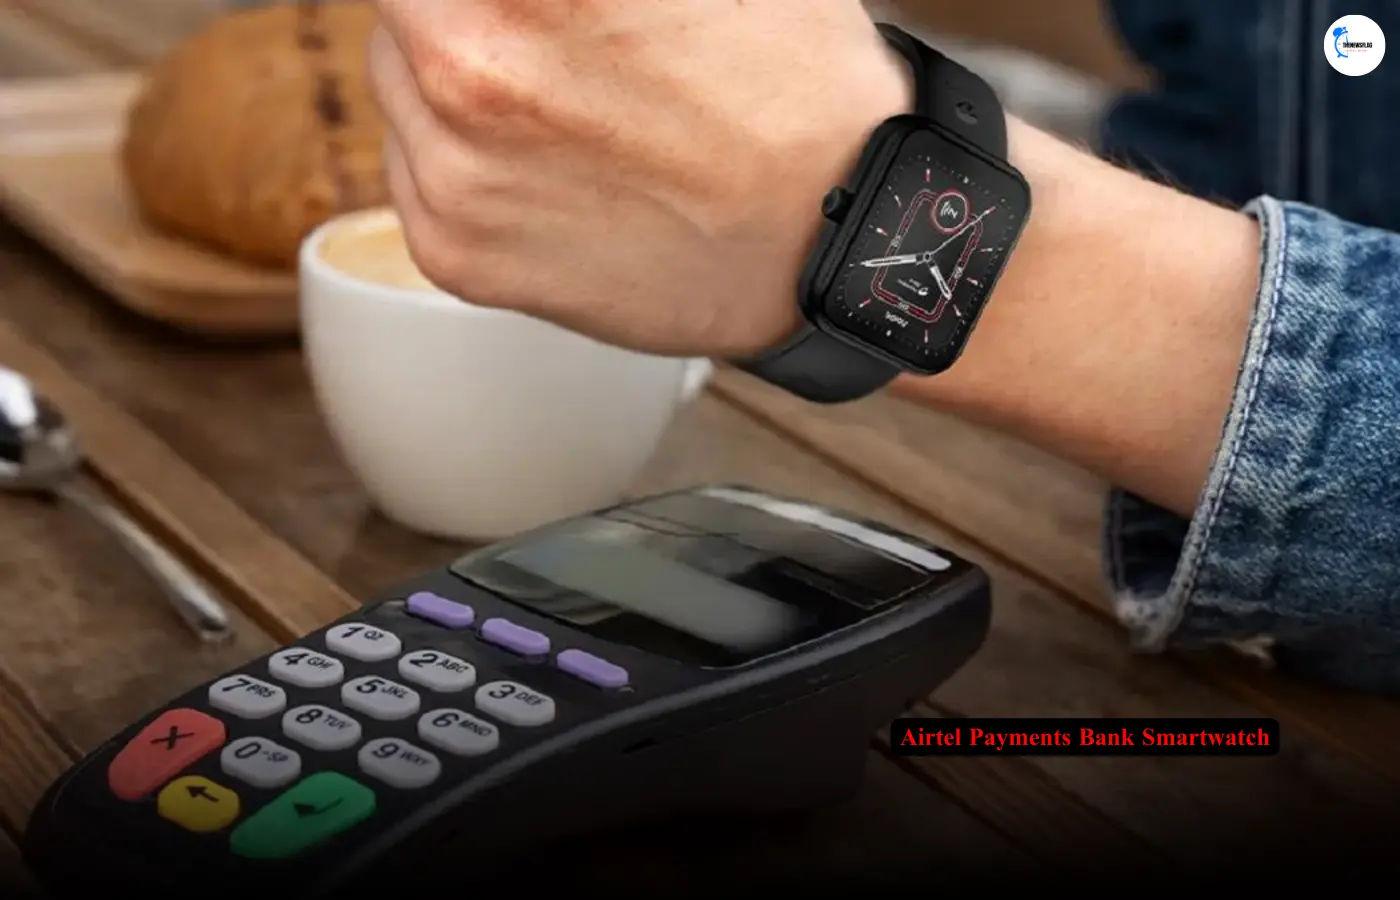 Airtel Payments Bank Smartwatch